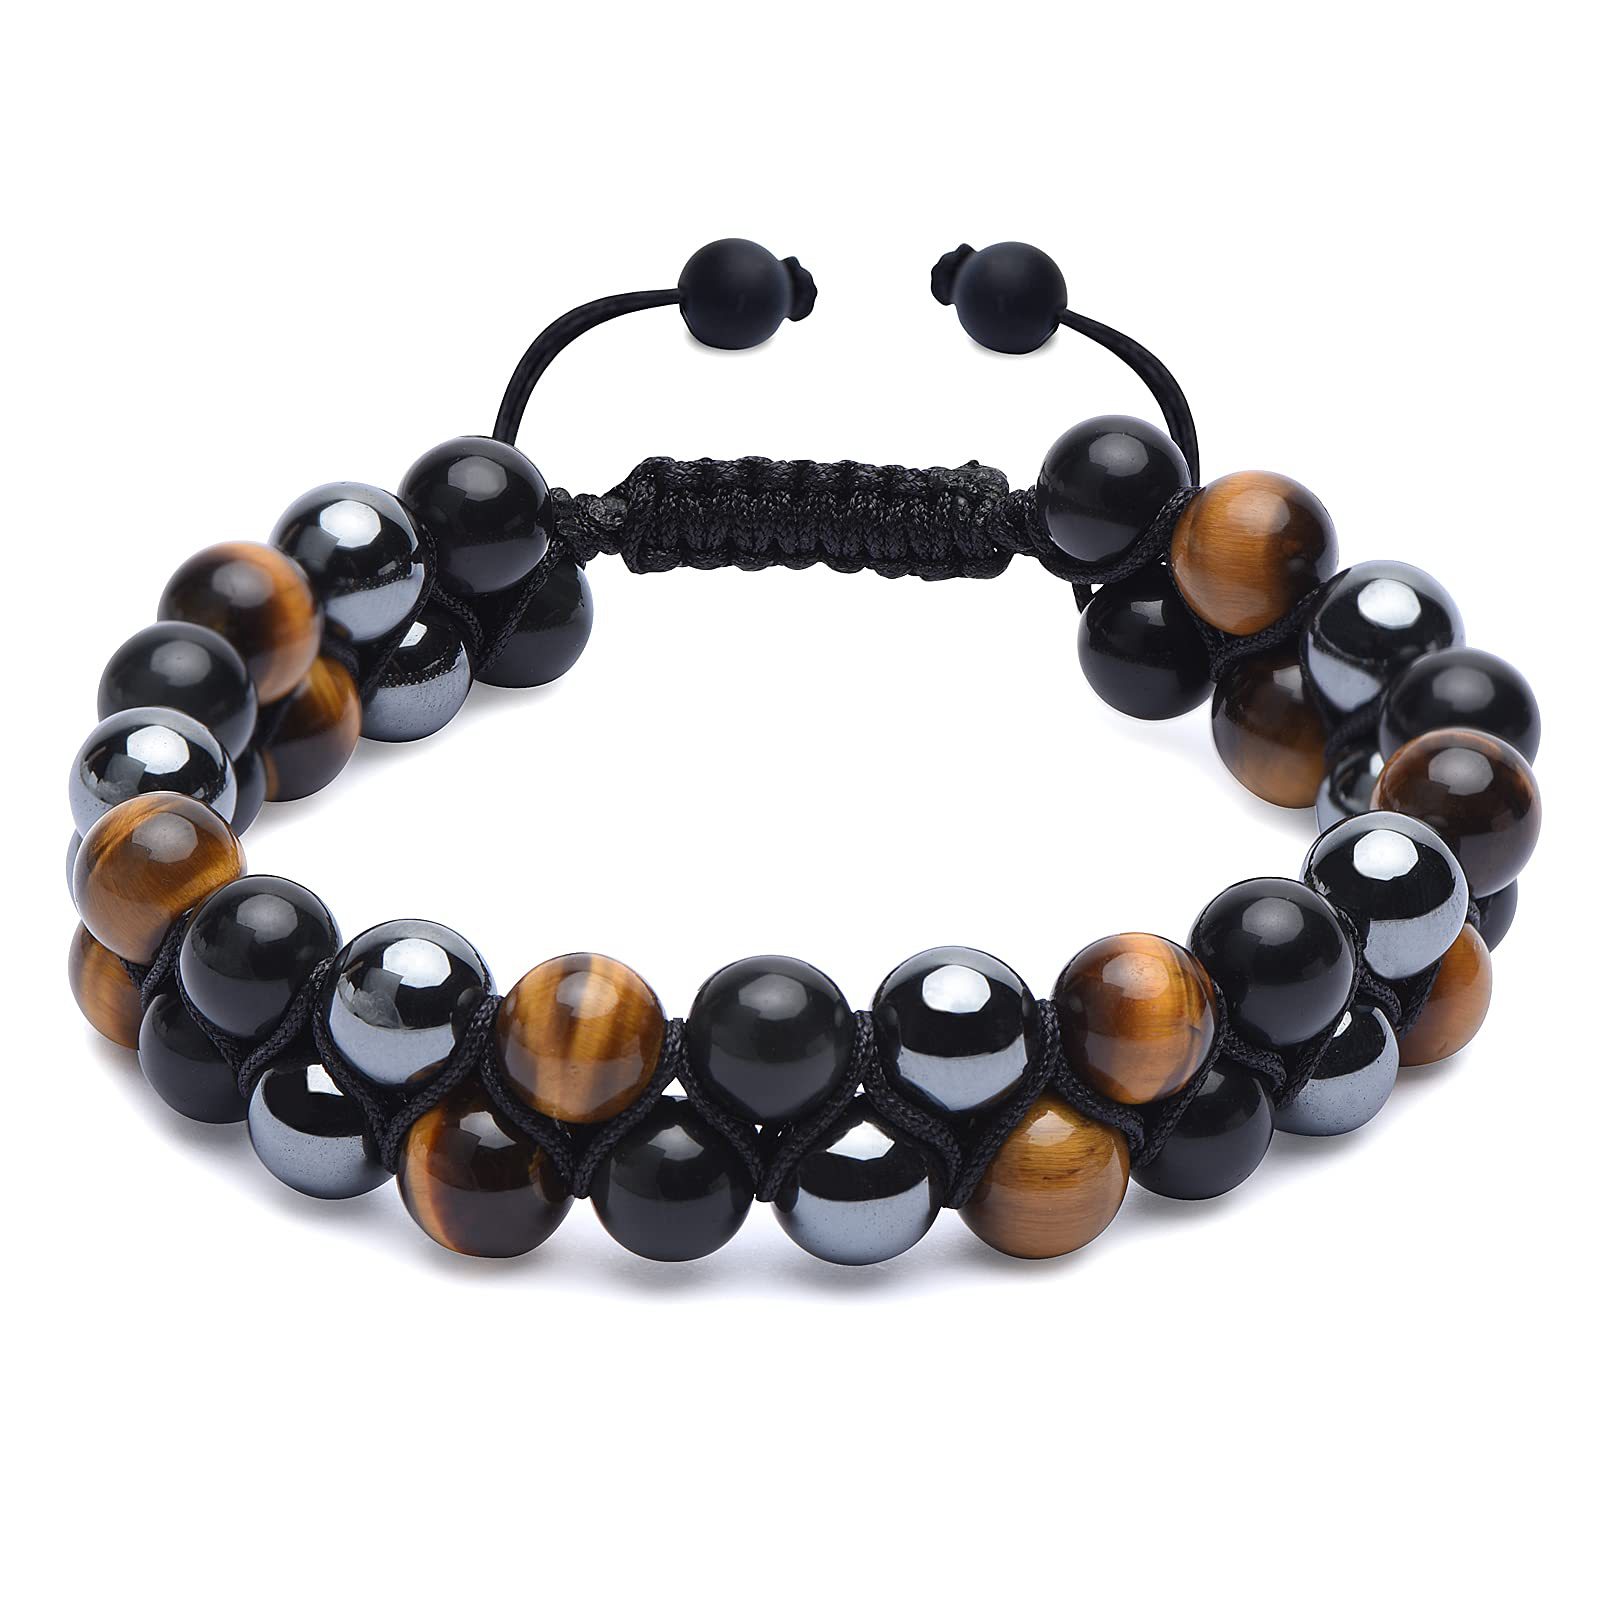 6:Tiger stone   black onyx (without accessories)